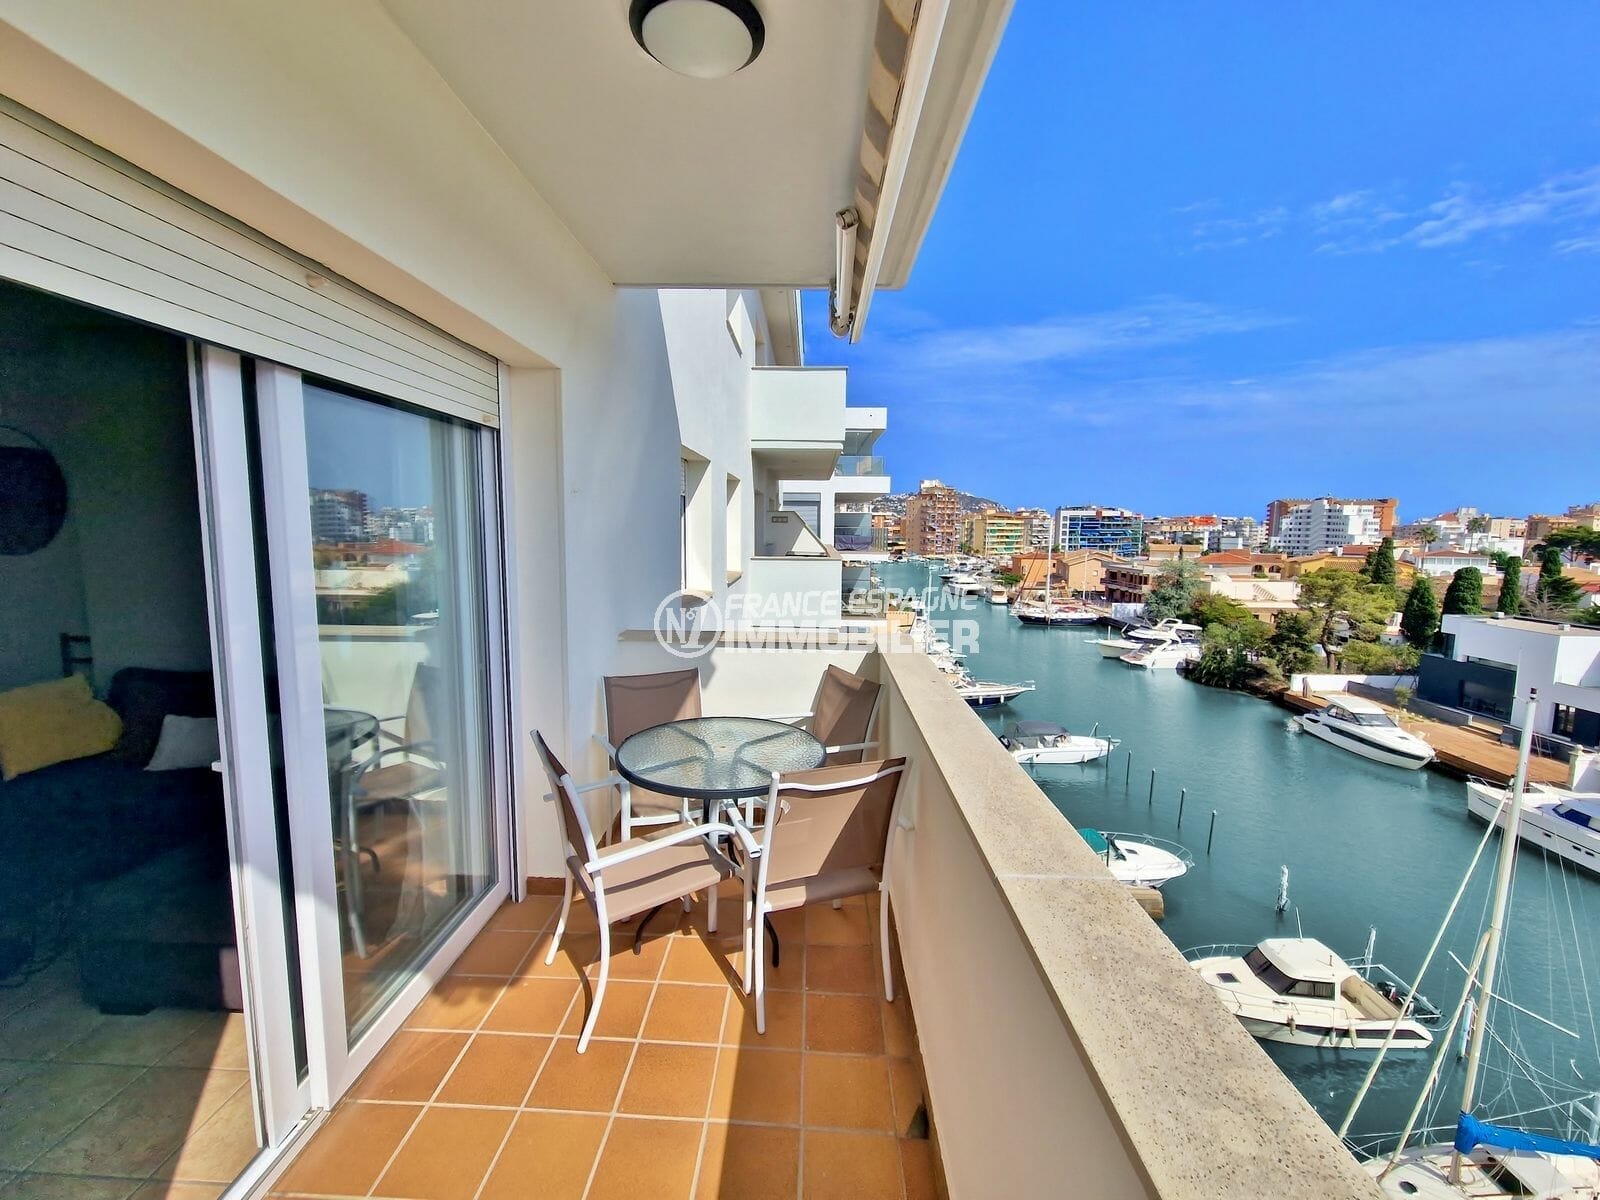 Exclusivity roses - appt 3 bedrooms, terrace canal view, beach 800m